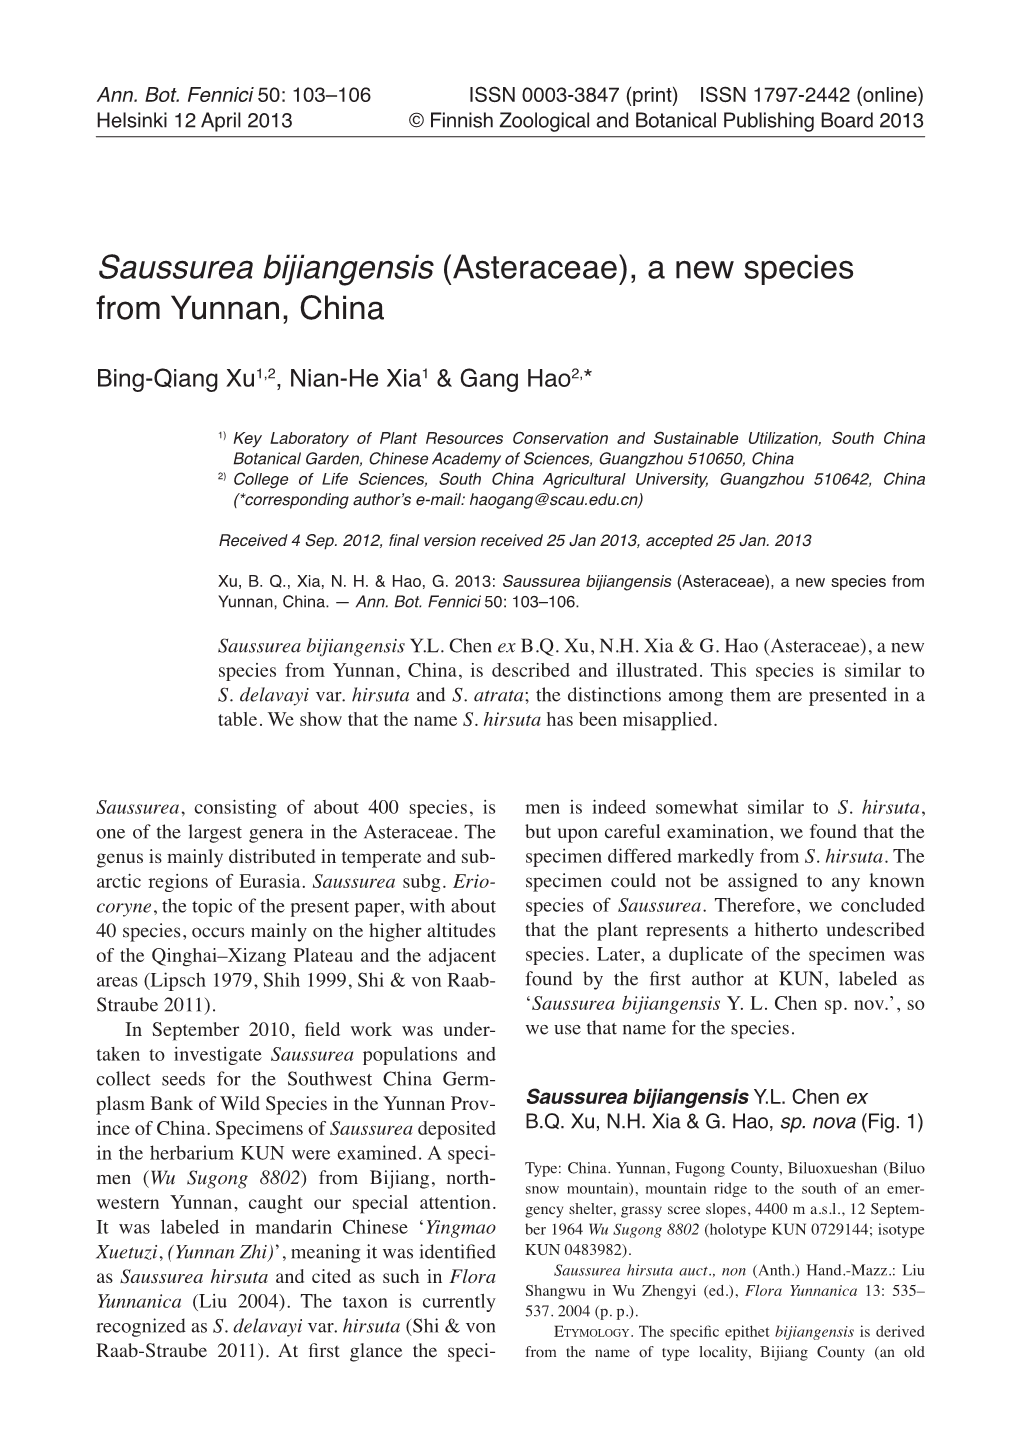 Saussurea Bijiangensis (Asteraceae), a New Species from Yunnan, China